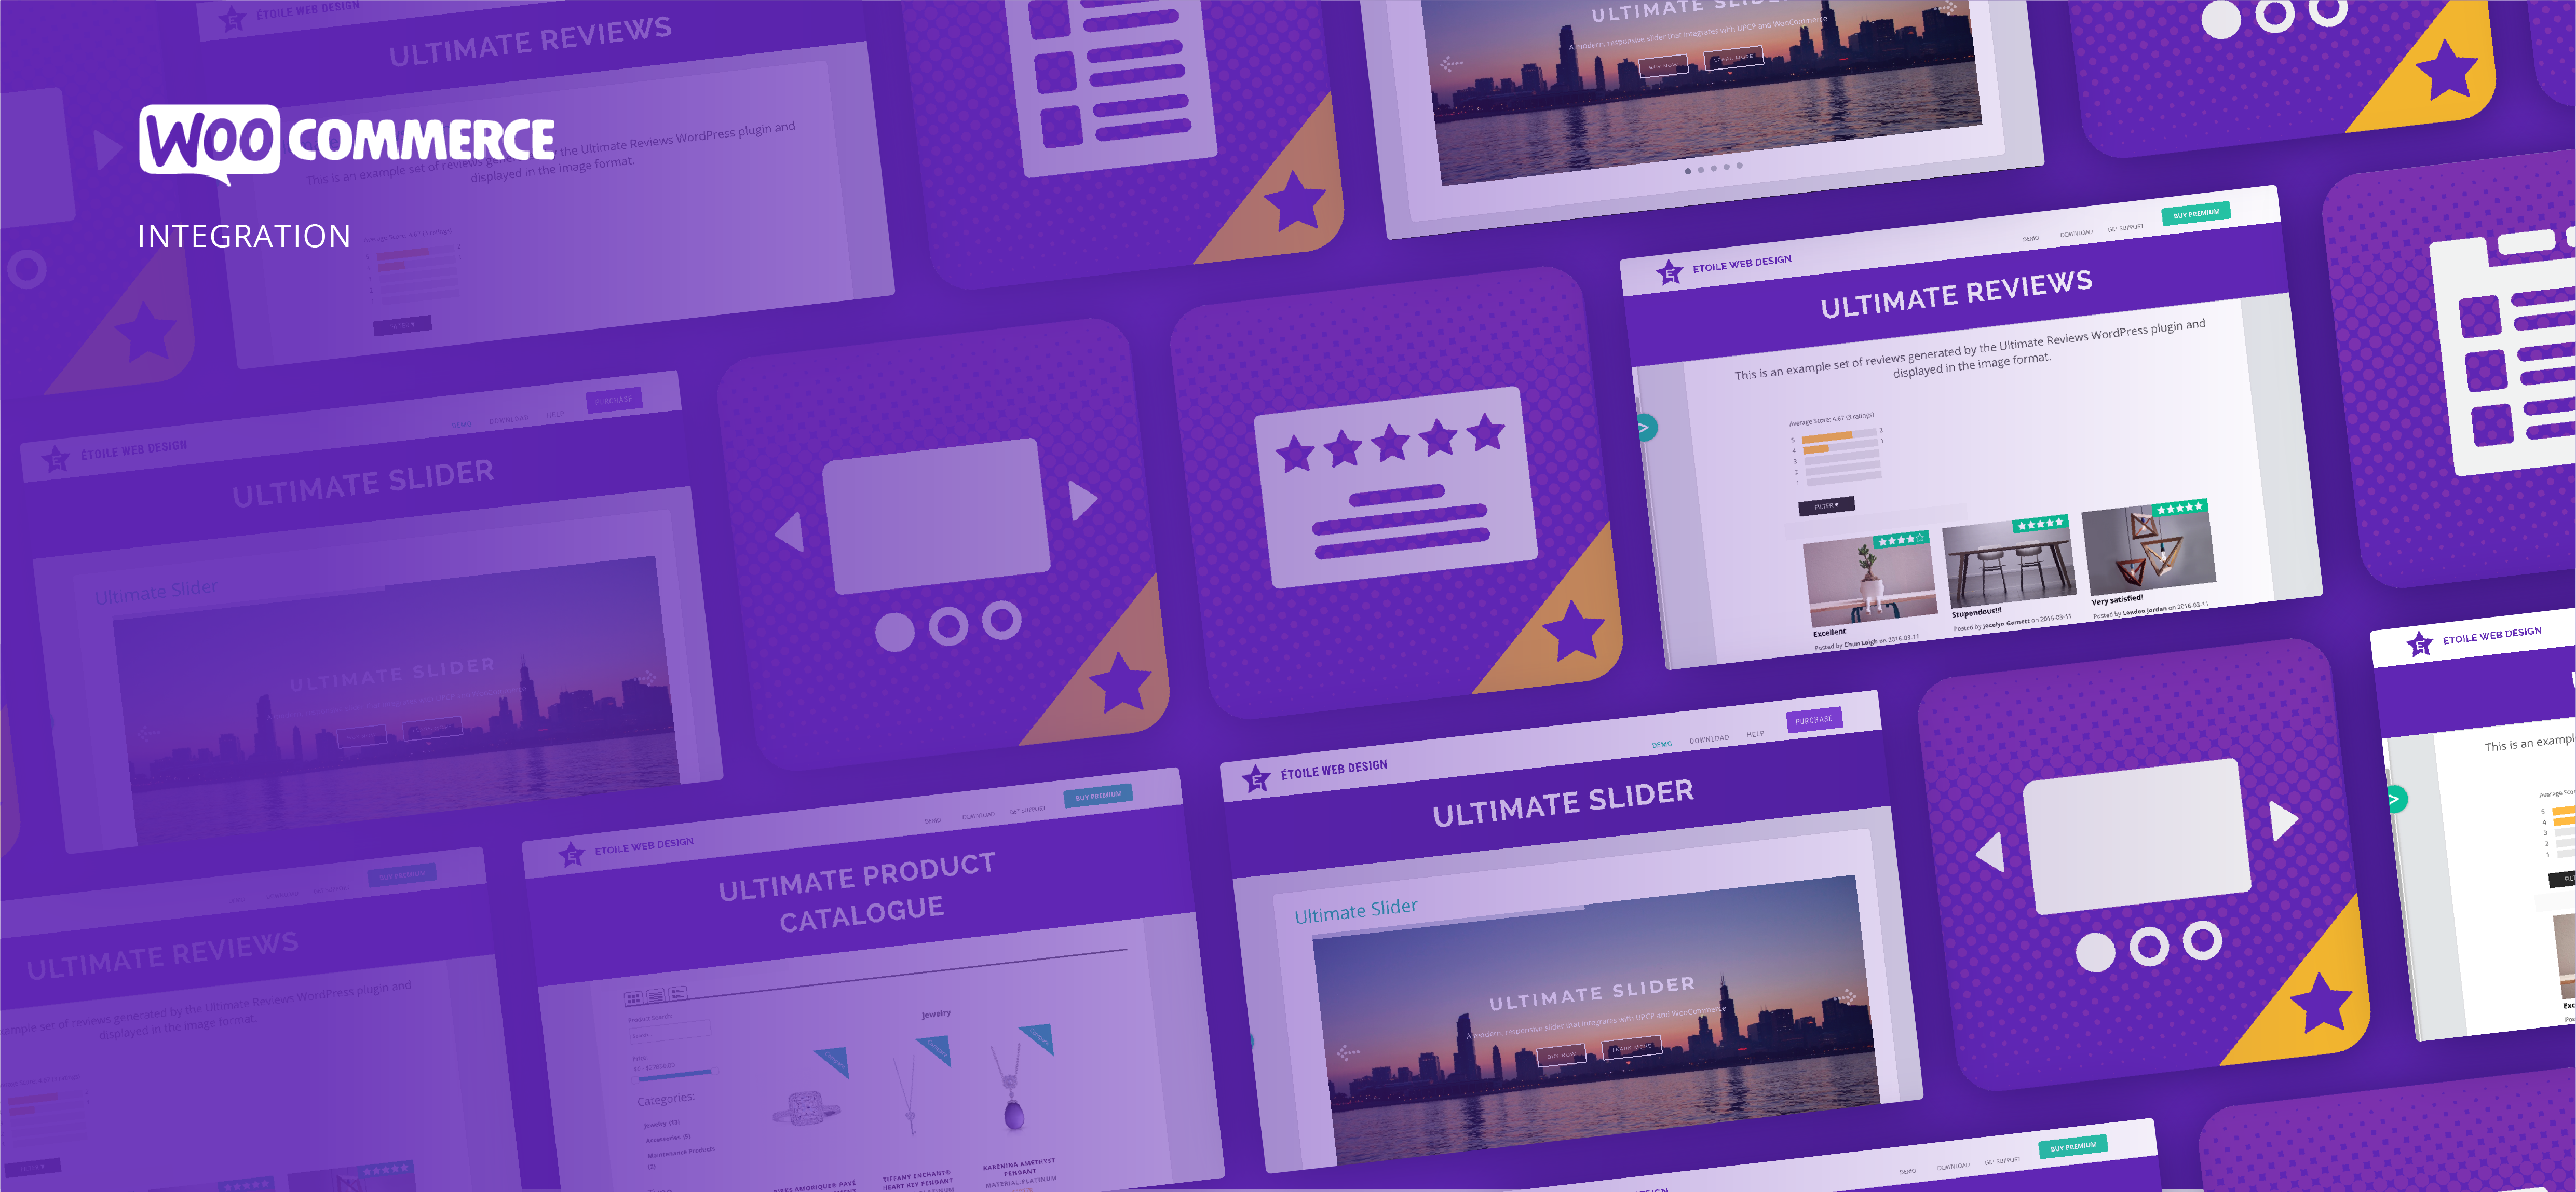 Get More Out of WooCommerce with These Fully Compatible WordPress Plugins